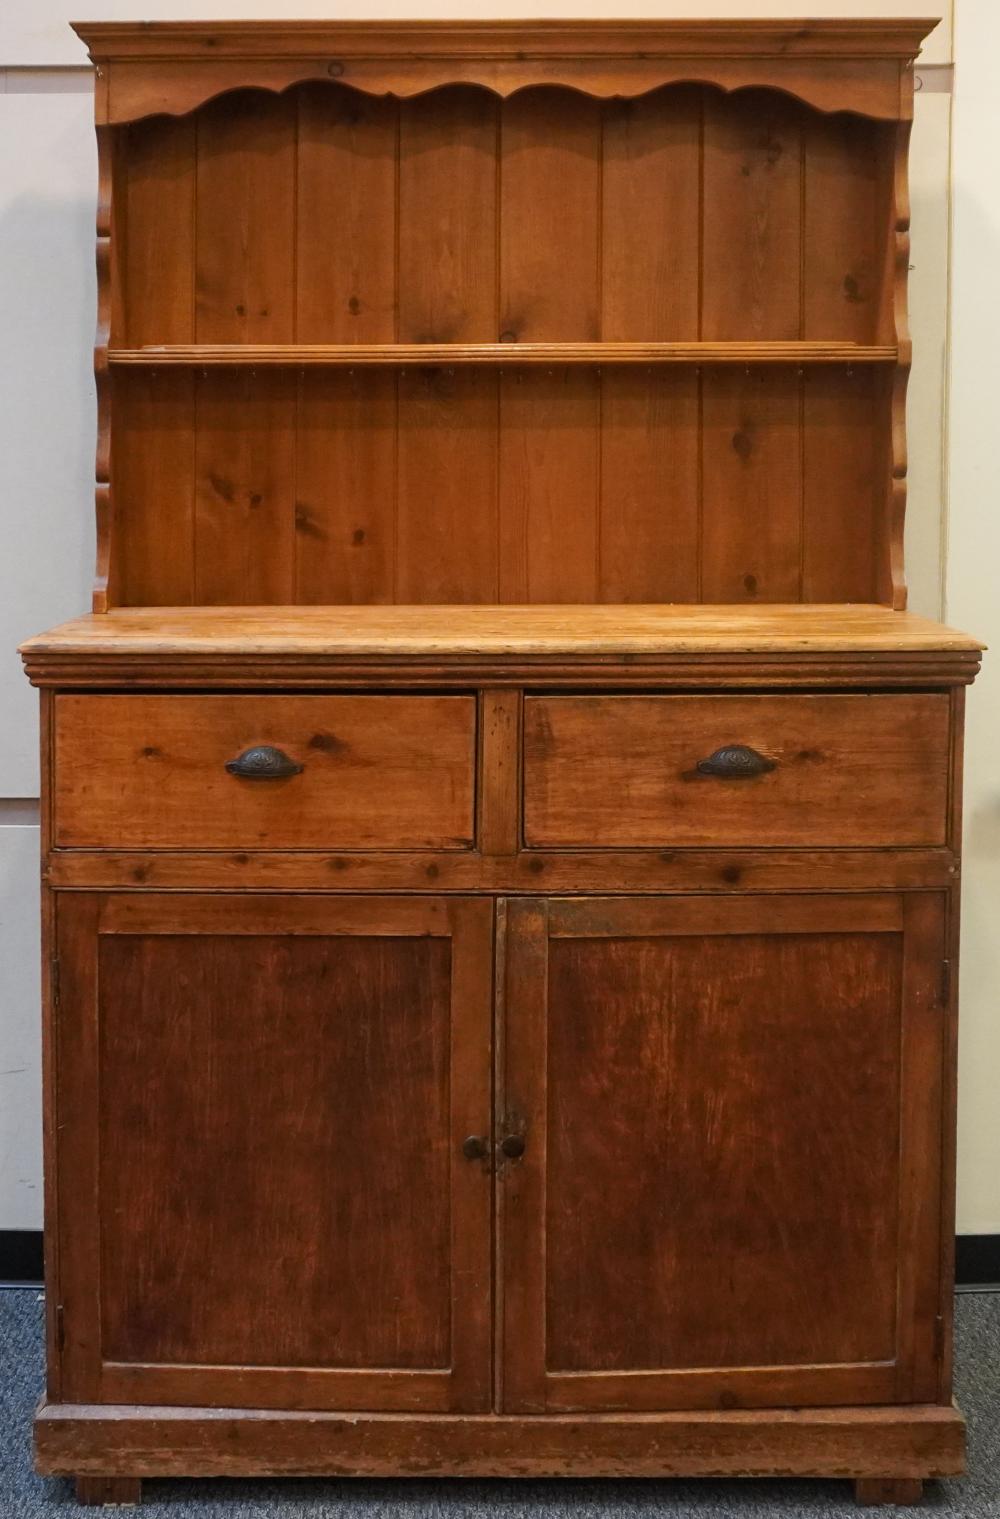 EARLY AMERICAN STYLE PINE HUTCH 309784